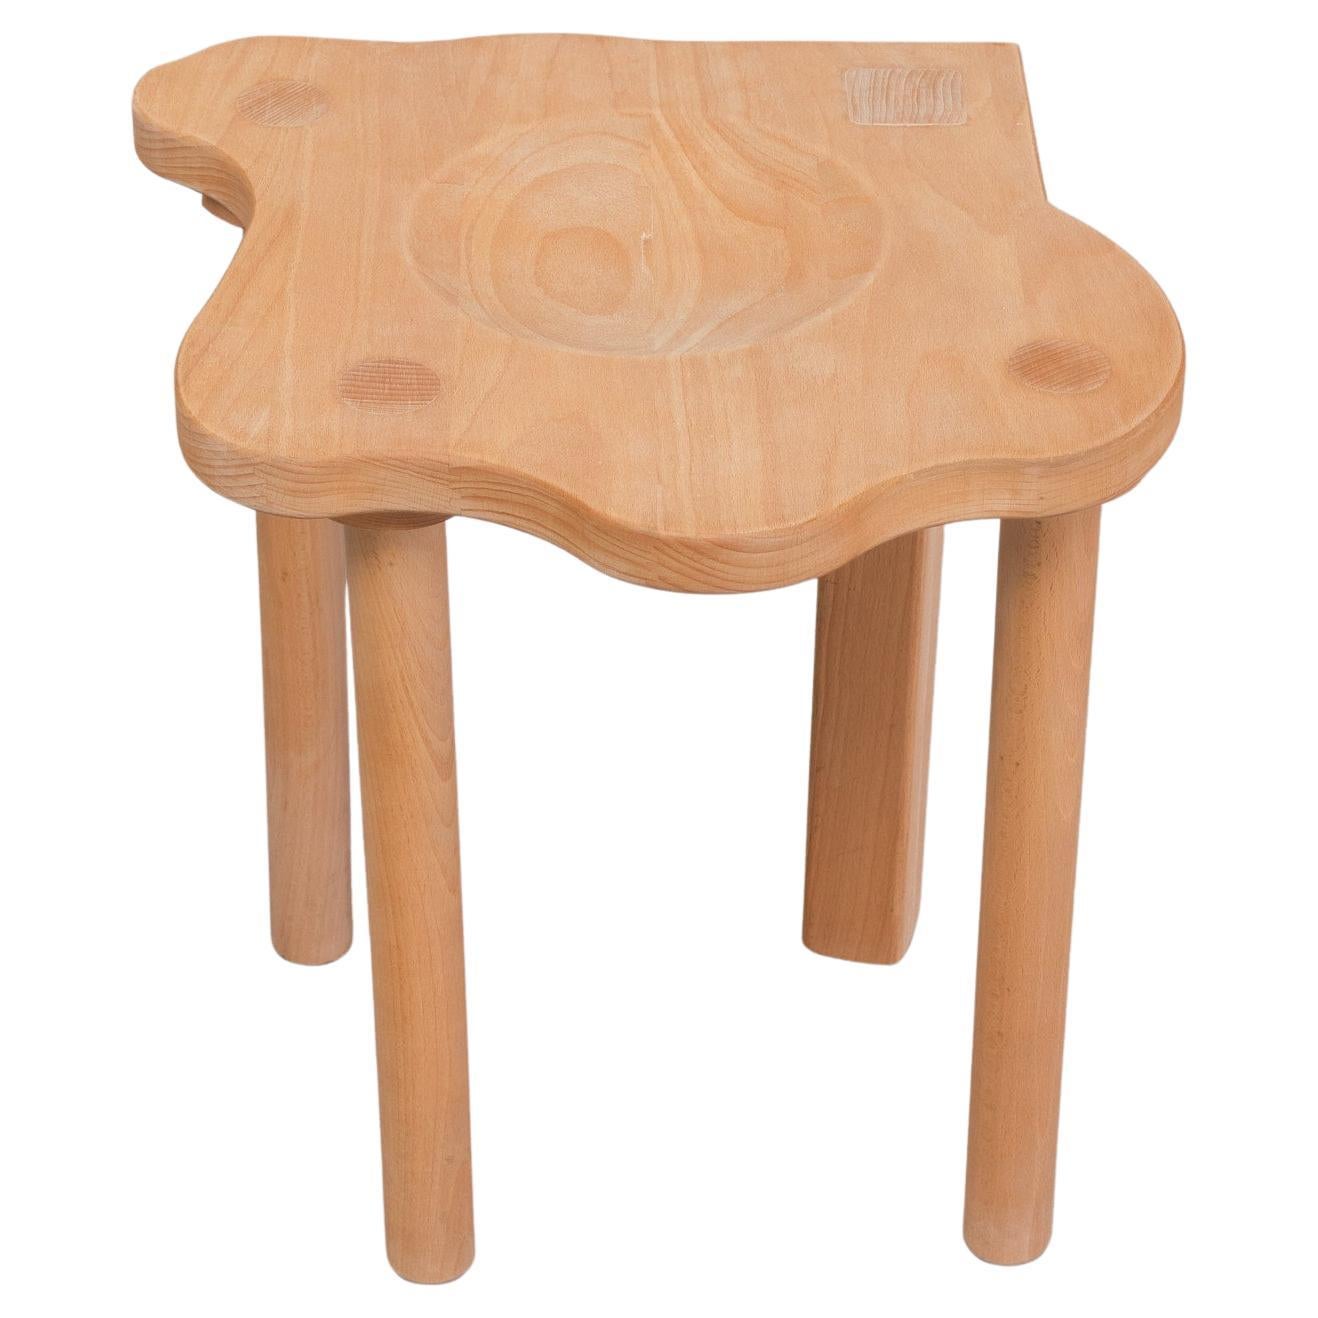 Solid Pine  Stool by Era Herbstb  1980s Germany  For Sale